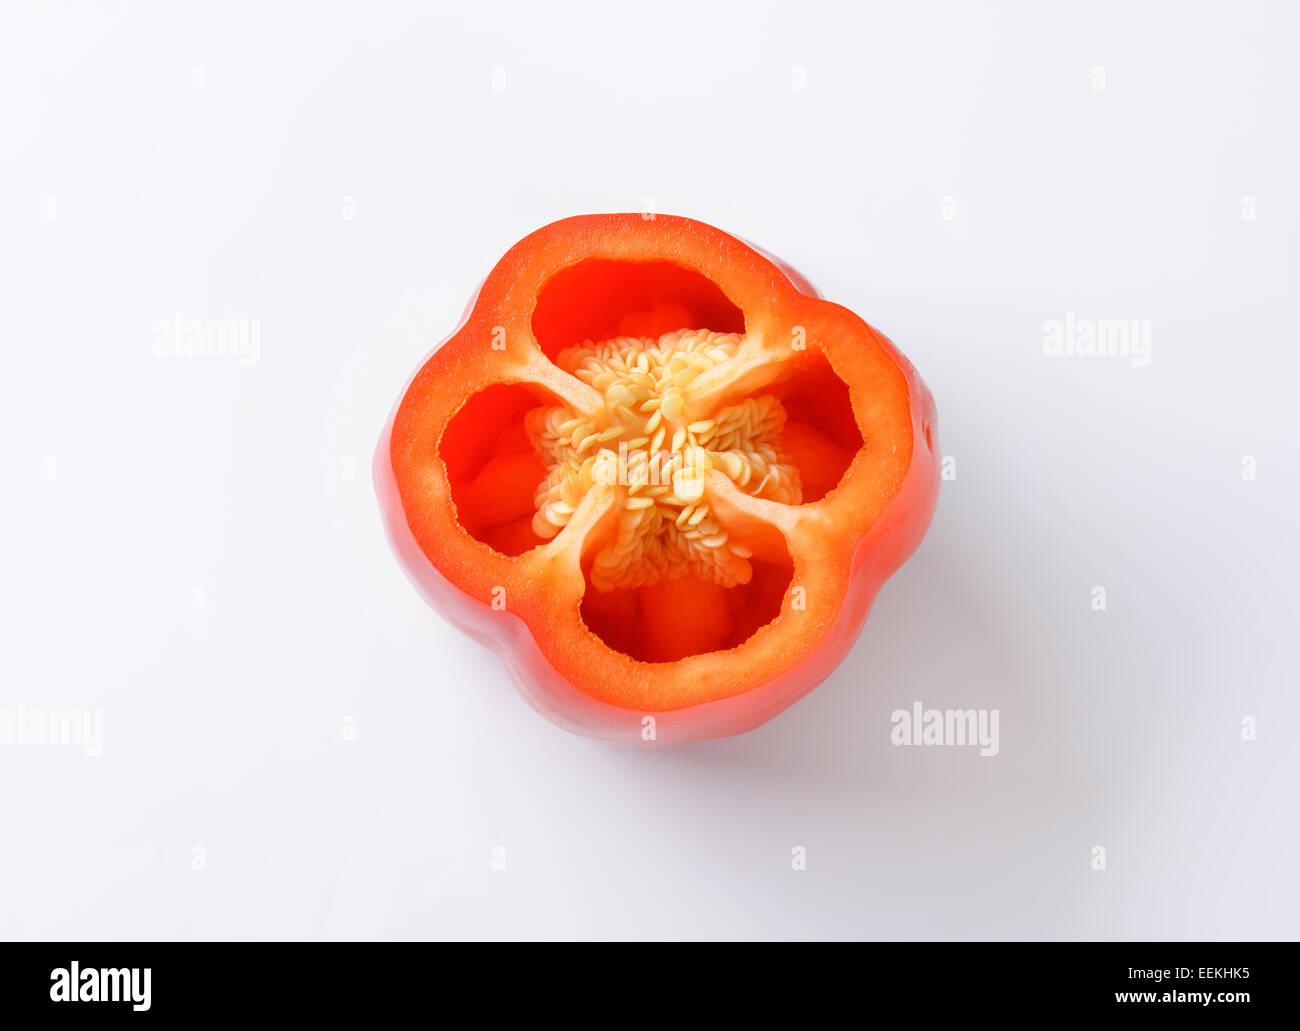 Overhead view of half a red bell pepper Stock Photo